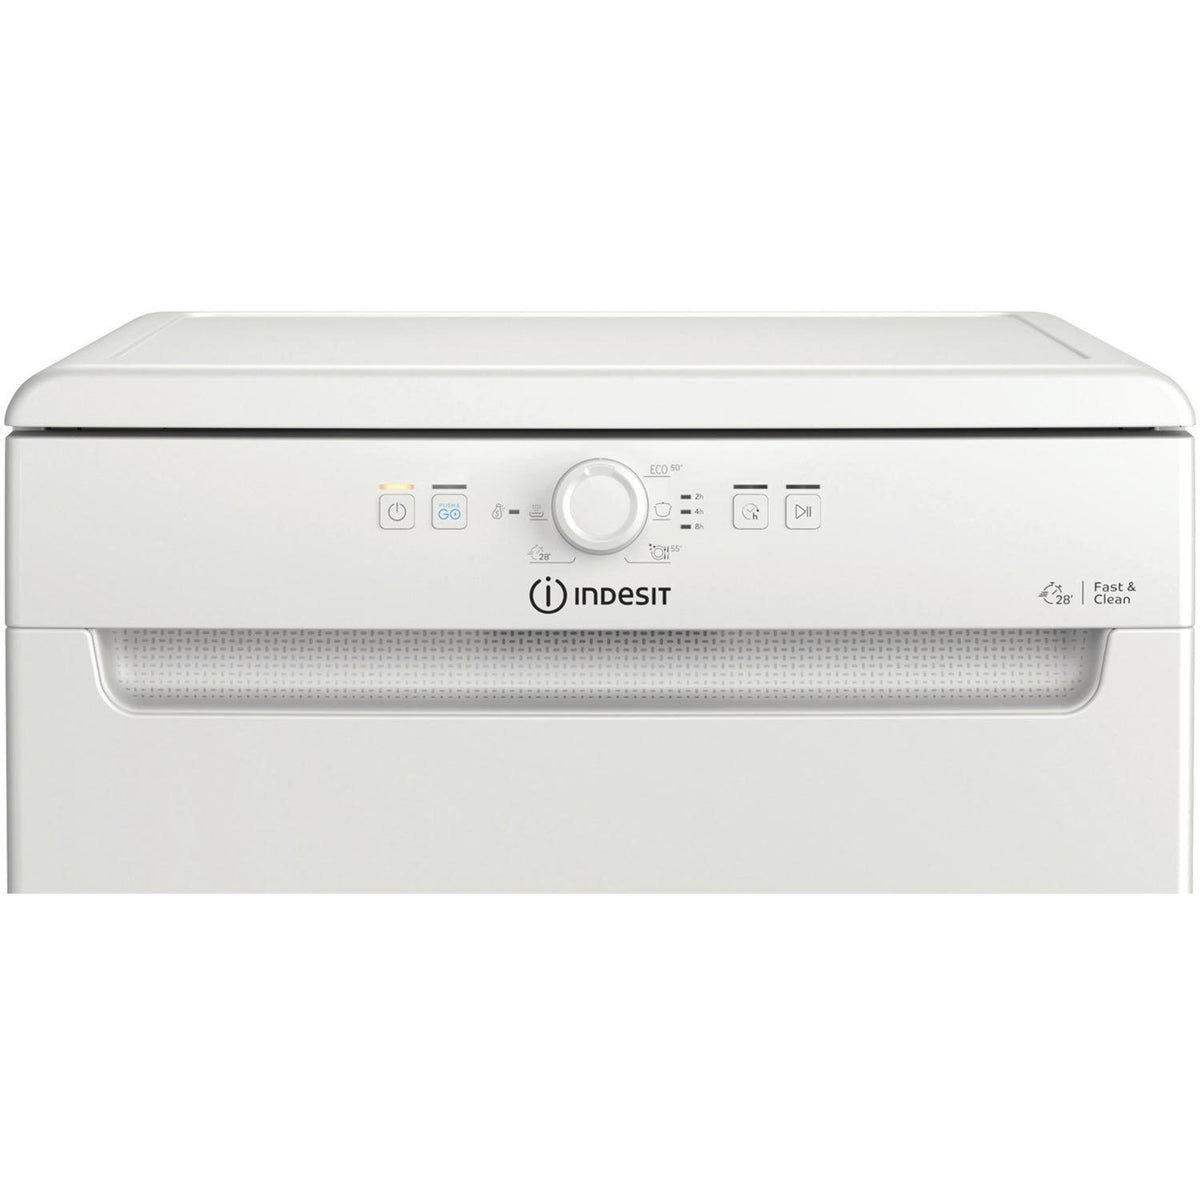 Indesit 14 Place Freestanding Dishwasher - White | D2FHK26UK from Indesit - DID Electrical